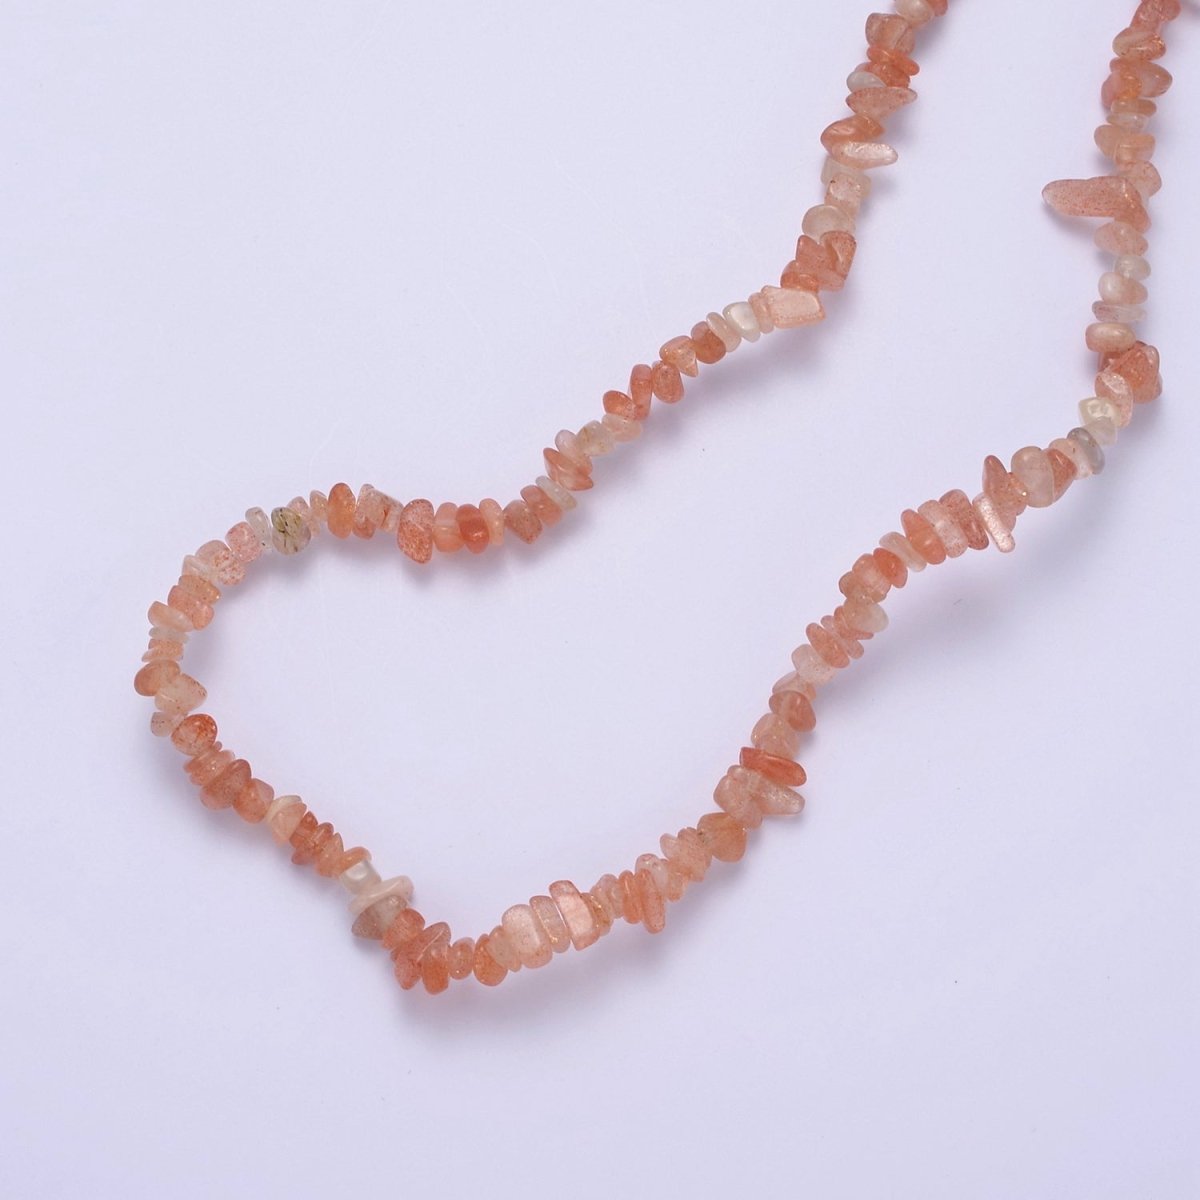 18.2 Inch Natural Orange Carnelian Crystal Stone Bead Necklace with 2" Extender | WA-638 Clearance Pricing - DLUXCA